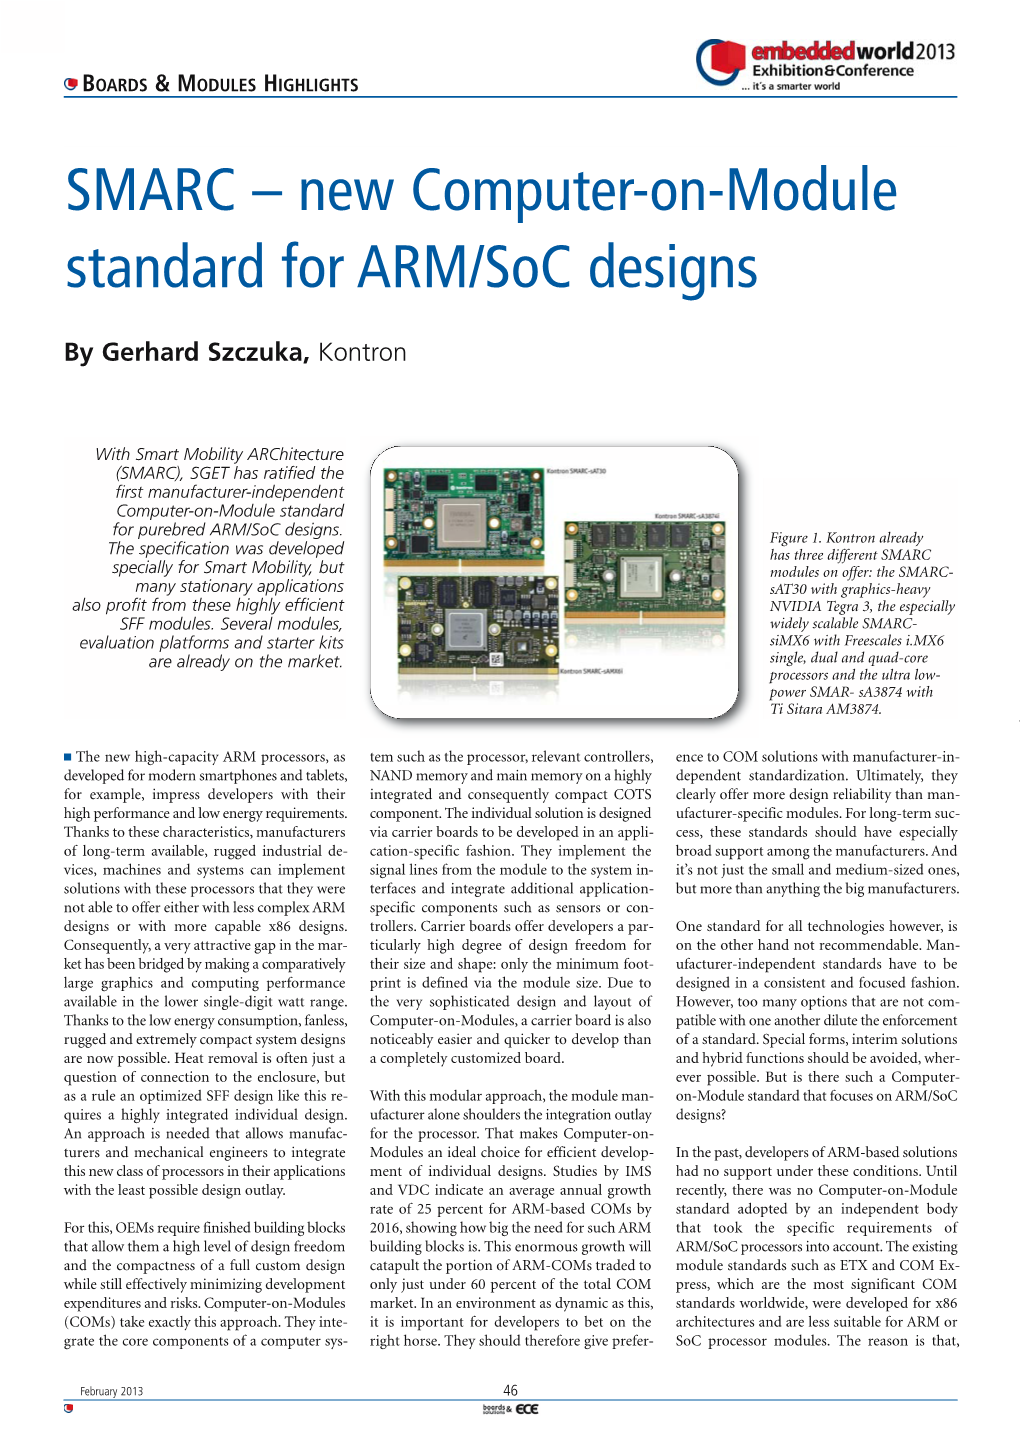 SMARC – New Computer-On-Module Standard for ARM/Soc Designs